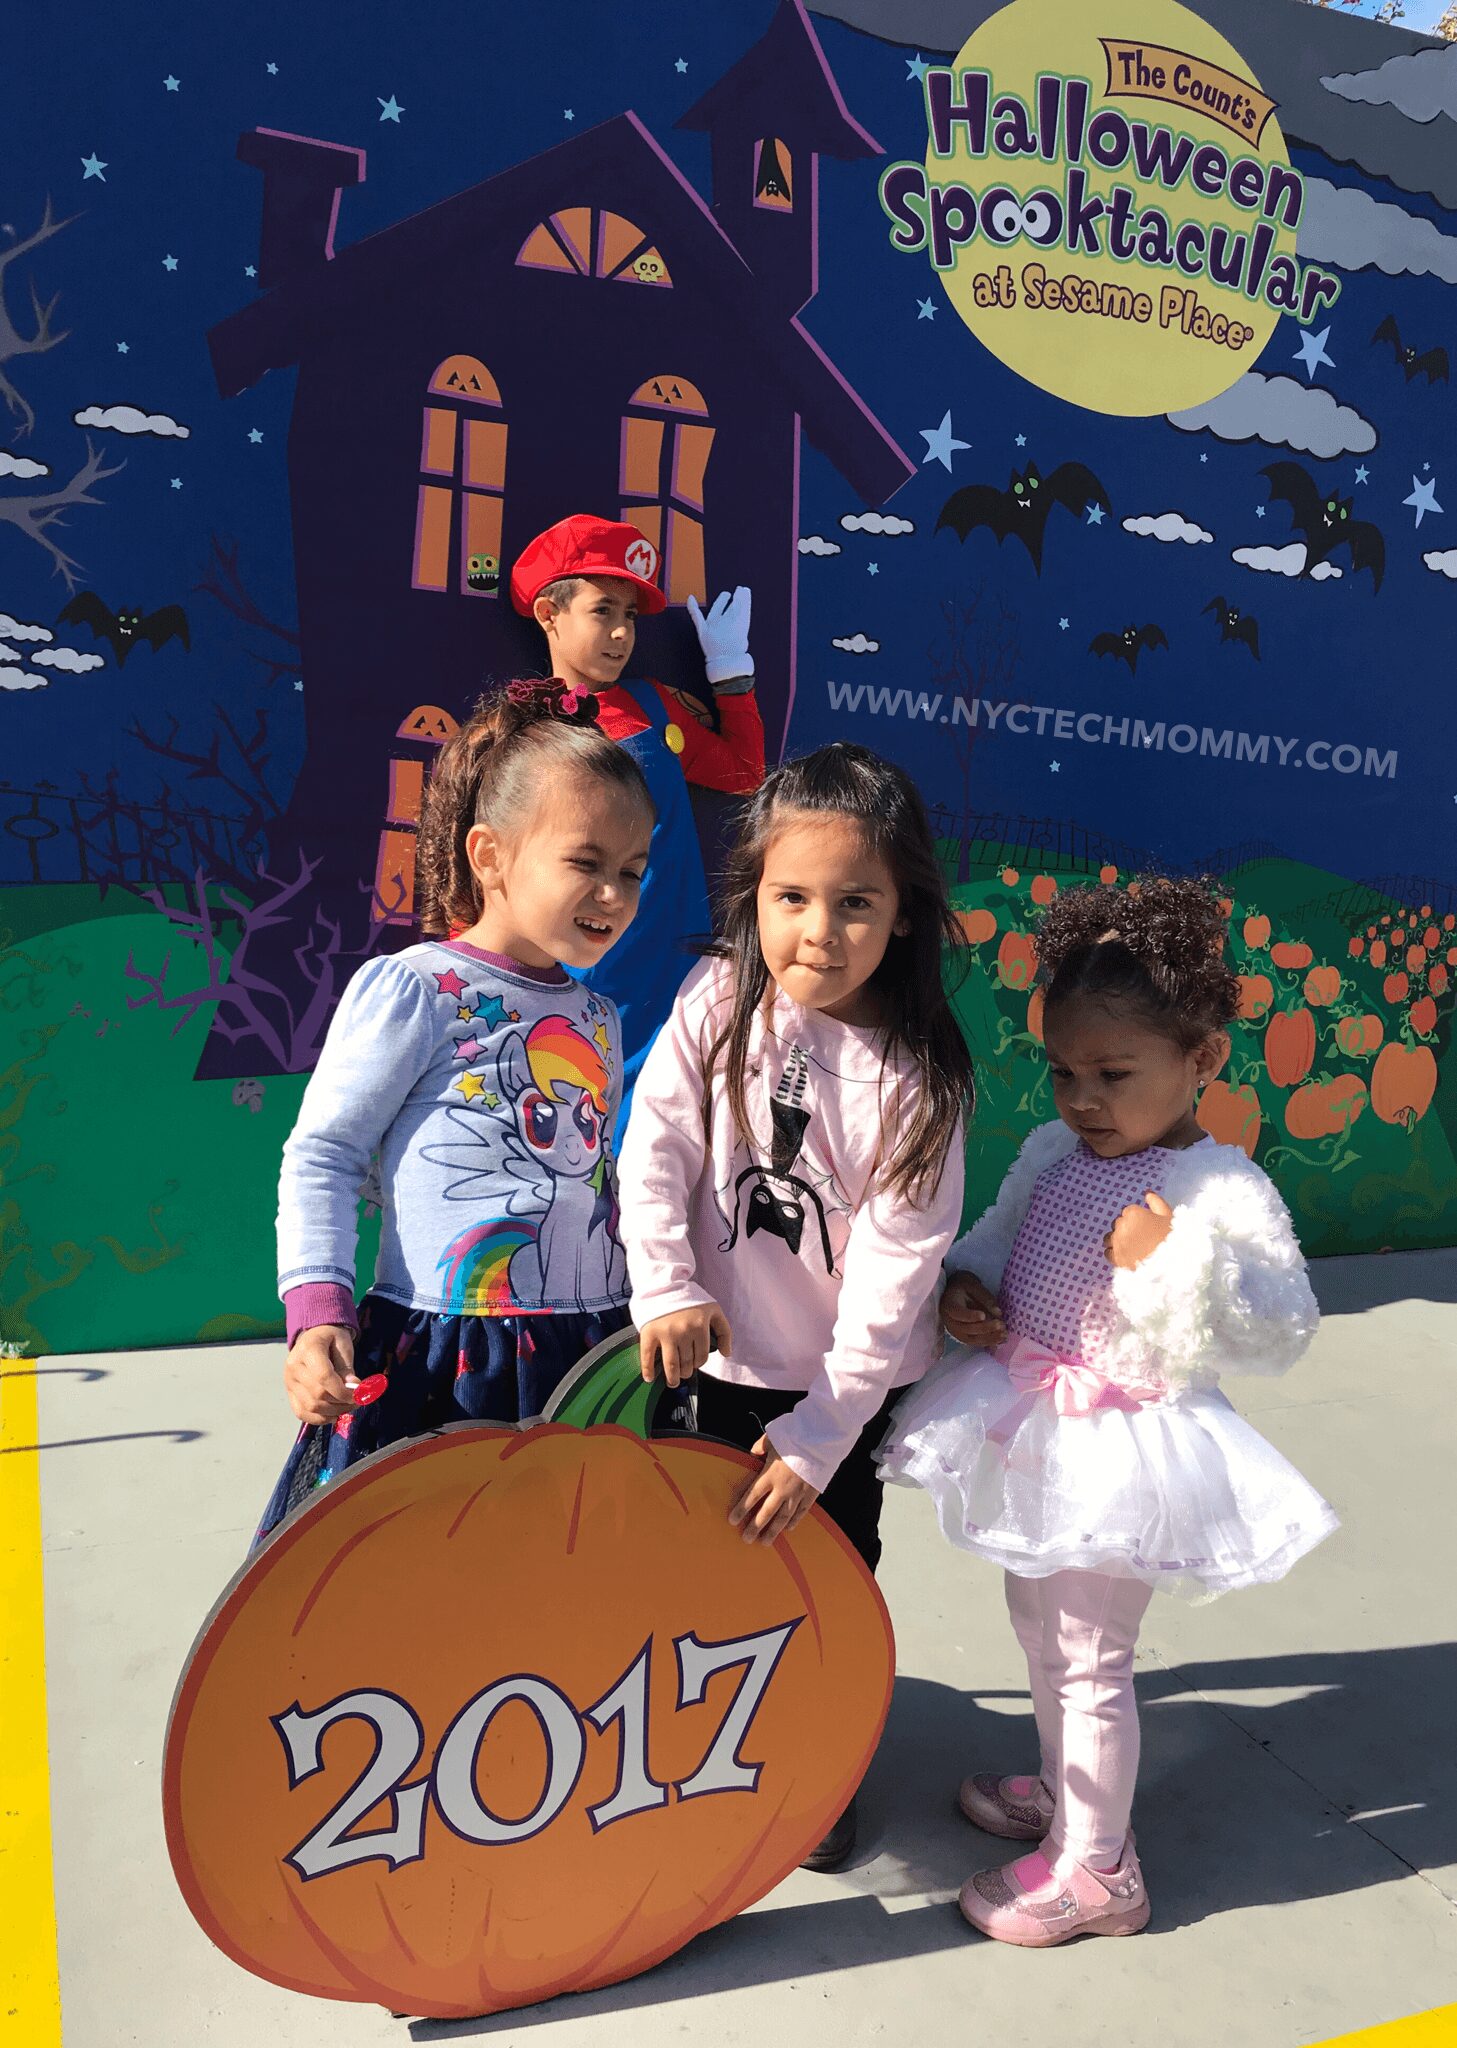 We had Spooktacular Time at Sesame Place! Here are my tips for a great visit to Sesame Place